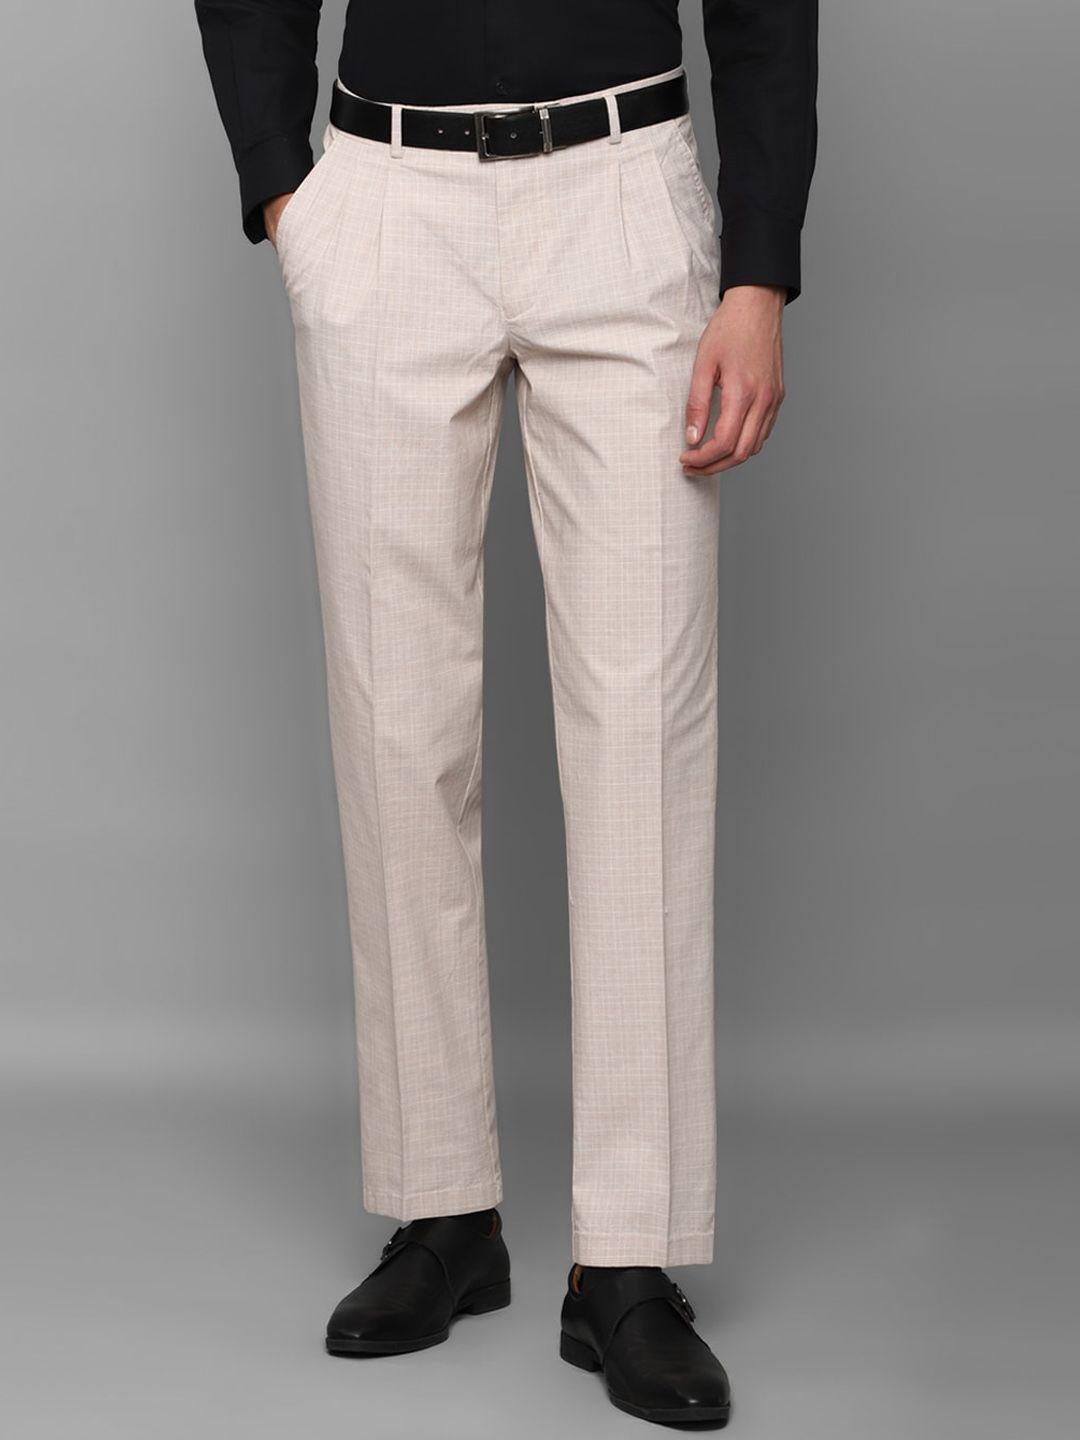 louis philippe men cream-coloured checked slim fit pleated trousers